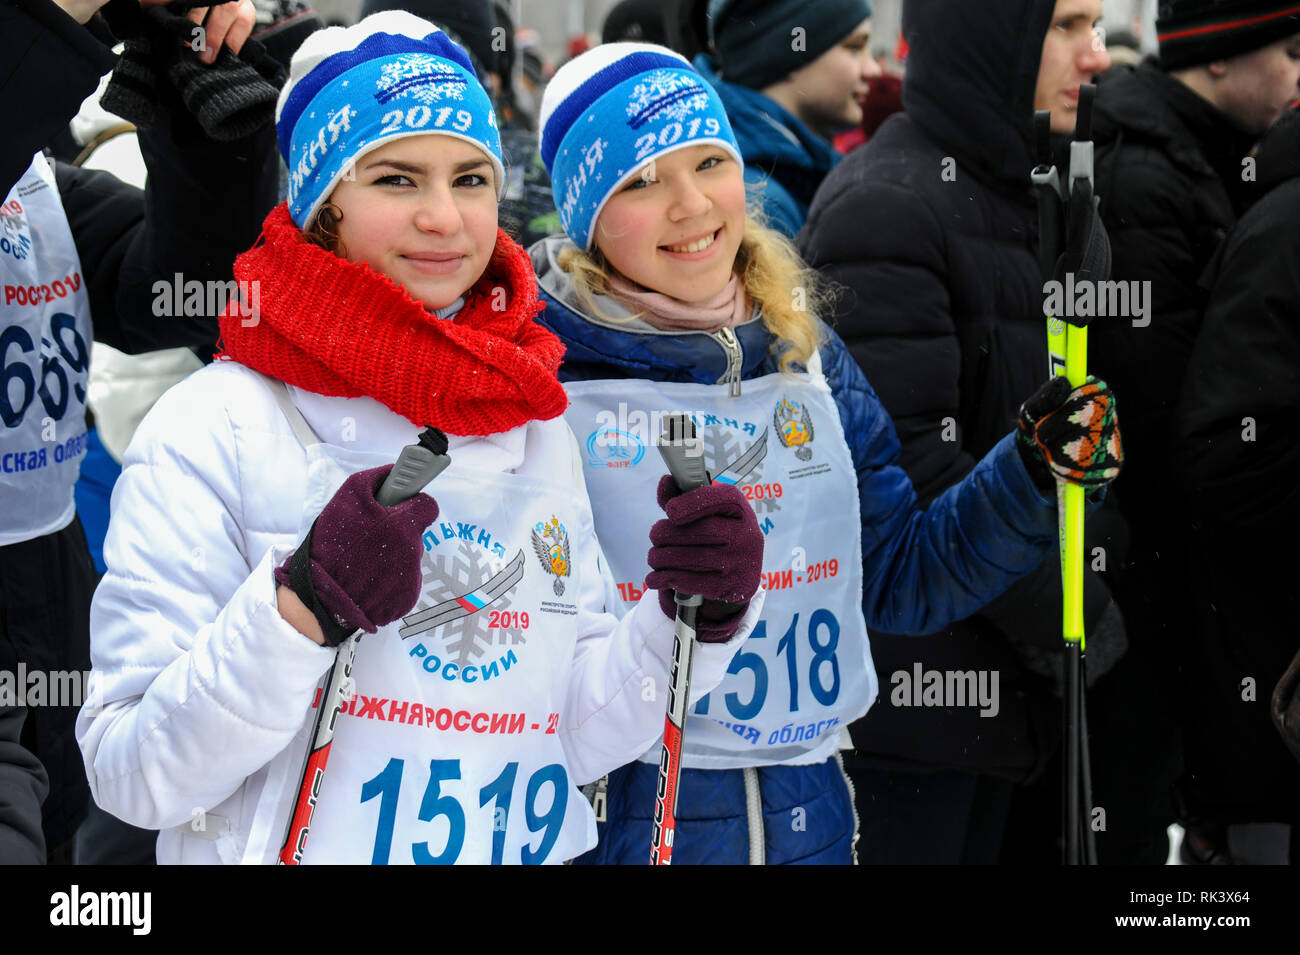 Tambov, Tambov region, Russia. 9th Feb, 2019. February 9, 2019, in the Park '' Friendship ''Tambov (Russia), held XXXVII all-Russian ski race''Ski track of Russia''. It was attended by about 6,000 residents of the Tambov region. The youngest participant was three years and six months old, and the oldest was over 80 years old. In the photo - Participants of the all-Russian ski race ''Ski track of Russia'' (Tambov, Russia) before the start. Credit: Demian Stringer/ZUMA Wire/Alamy Live News Stock Photo